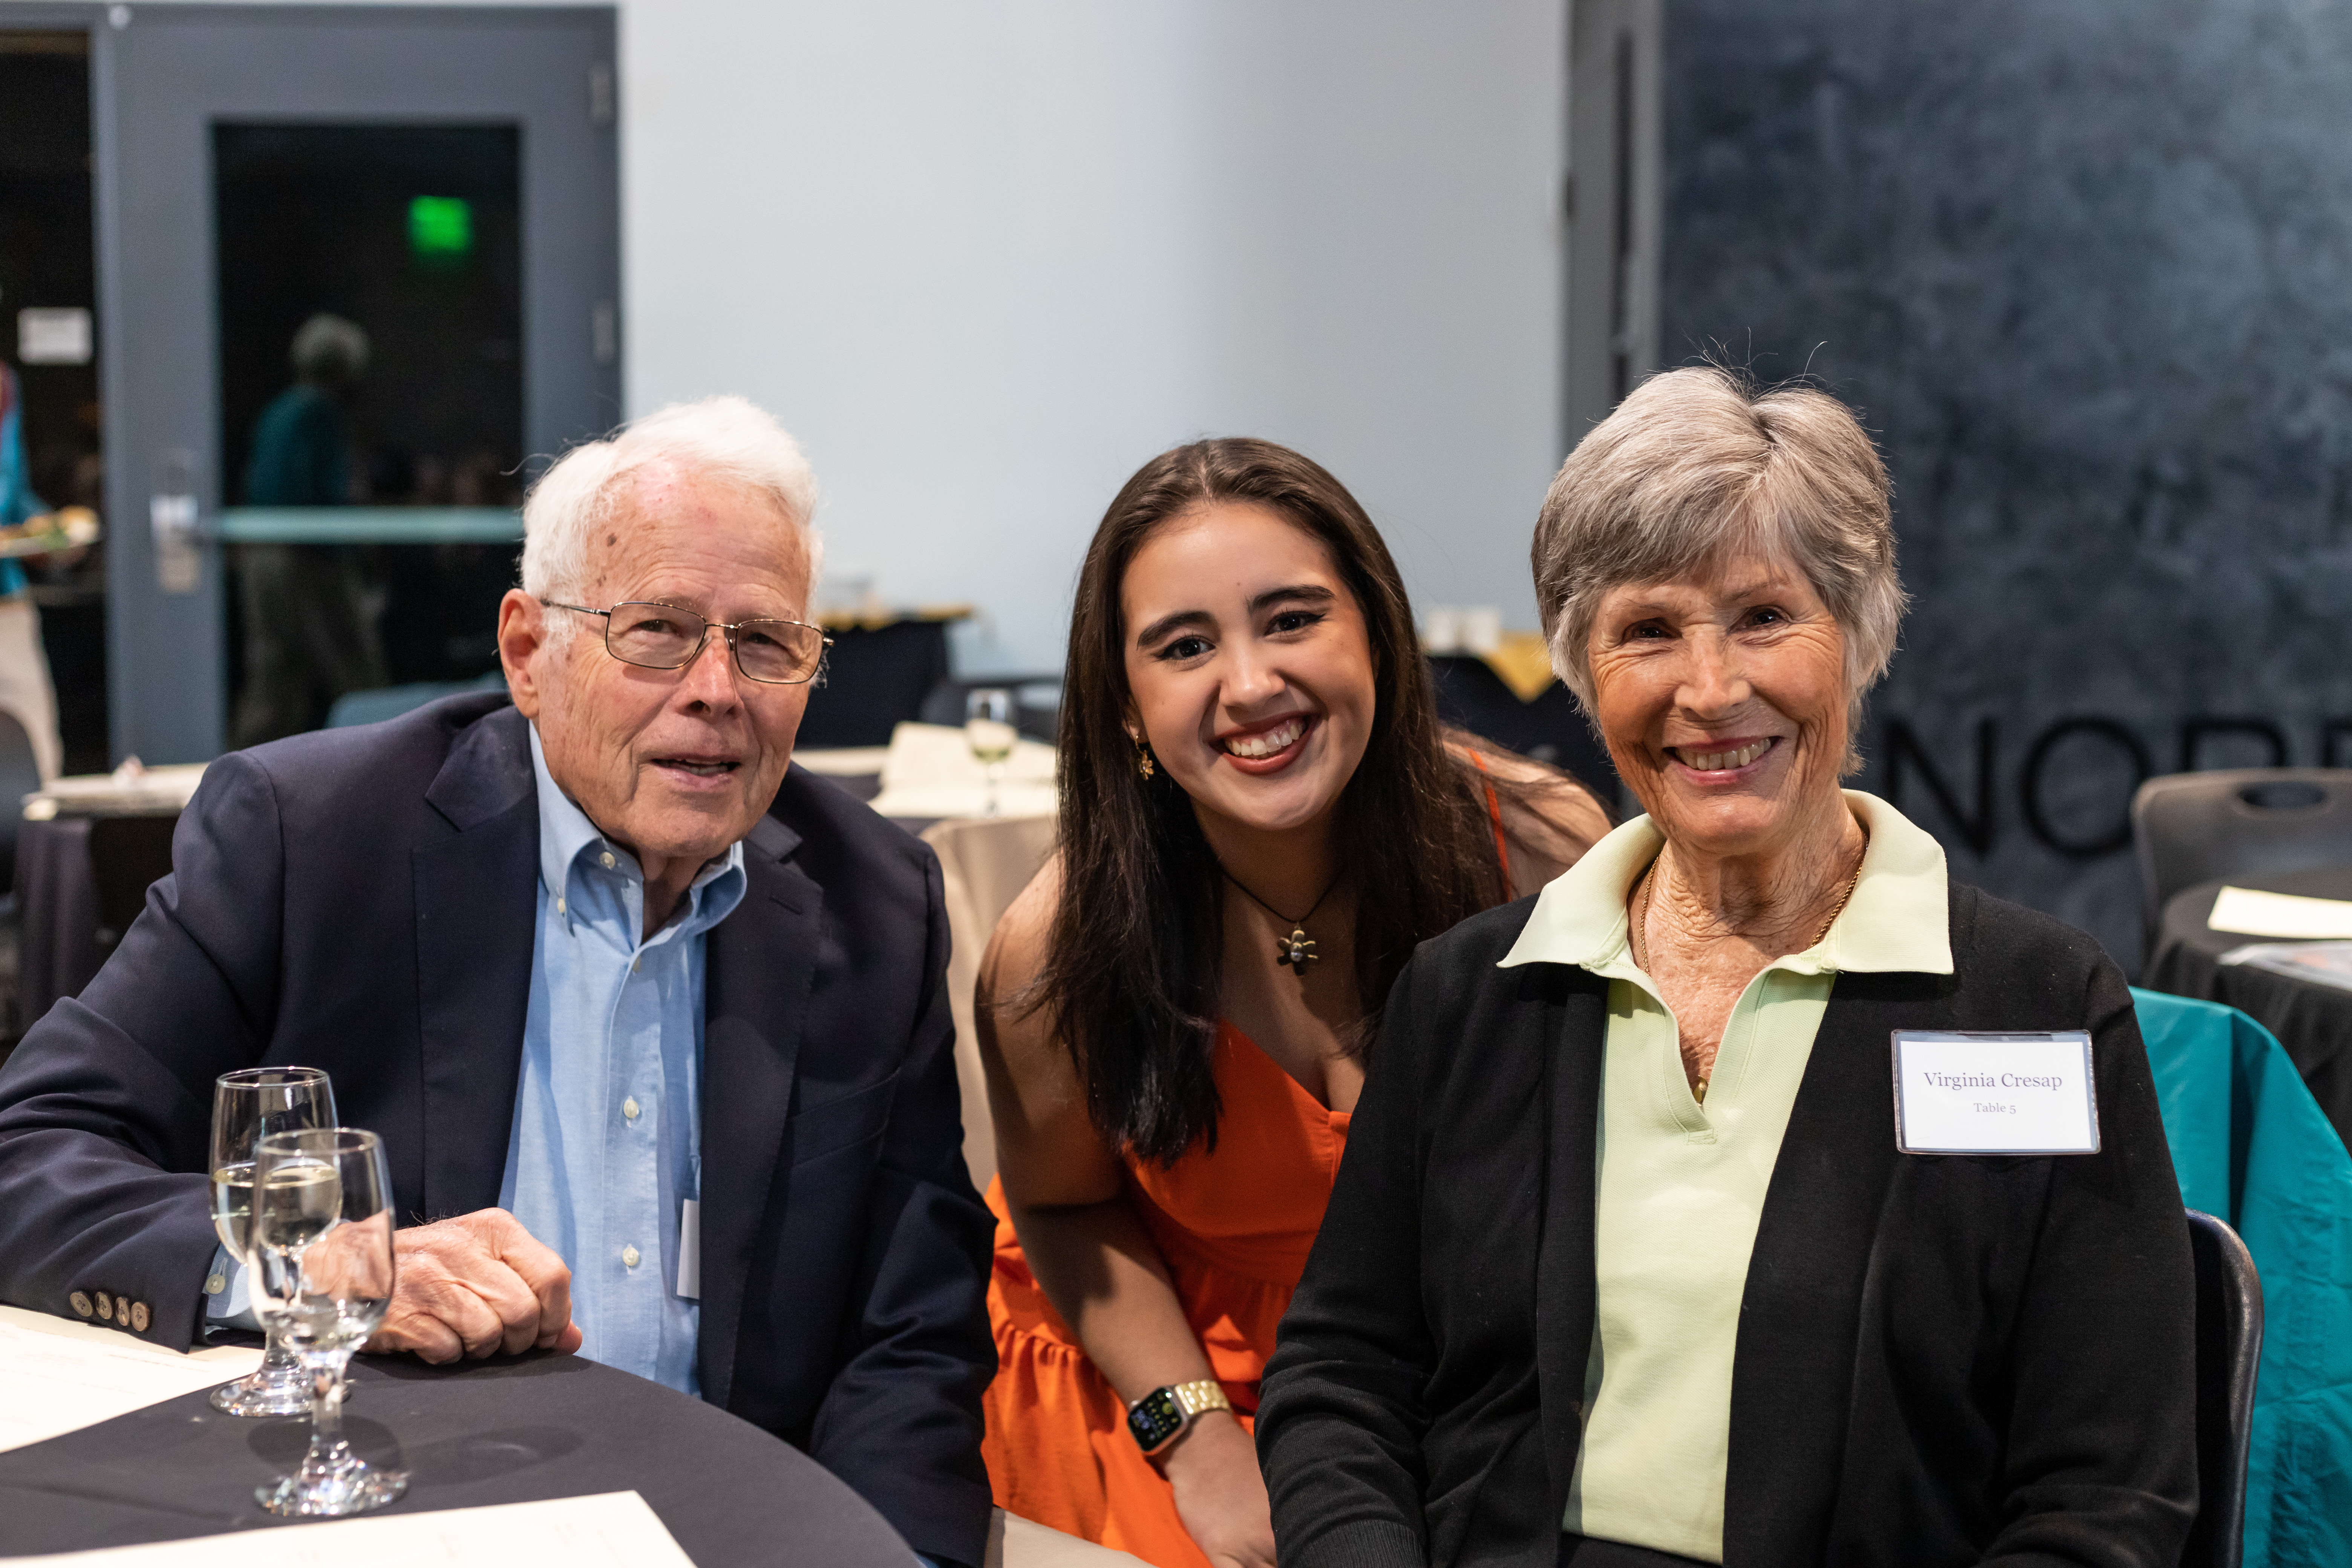 Guy and Virginia Cresap with Fellow Sophia Molina <span class="cc-gallery-credit">[Sienna Busby]</span>